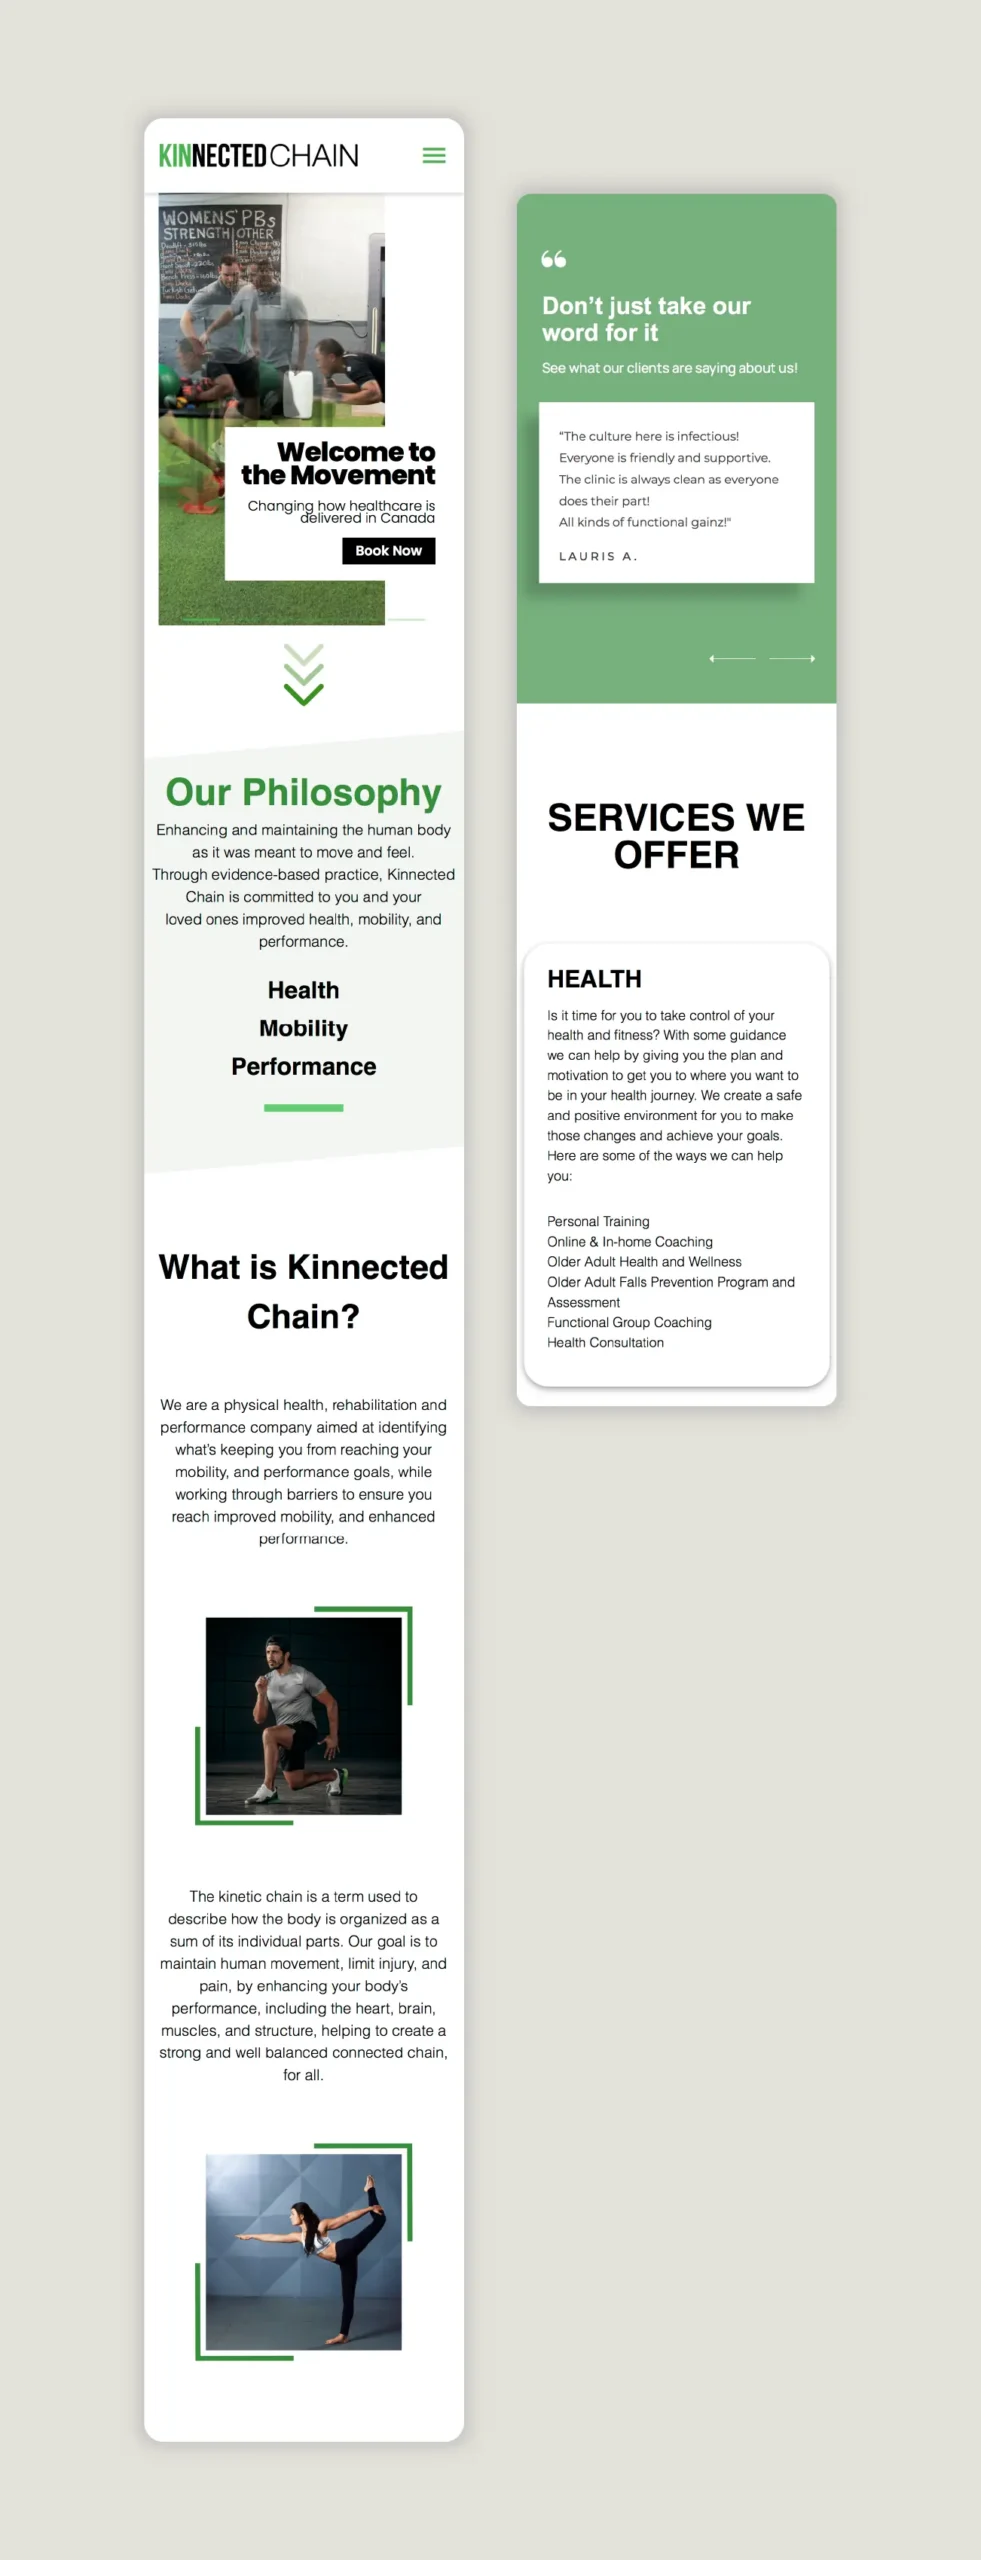 Kinnected Chain - Mobile View - Order In Chaos - Toronto Web Design